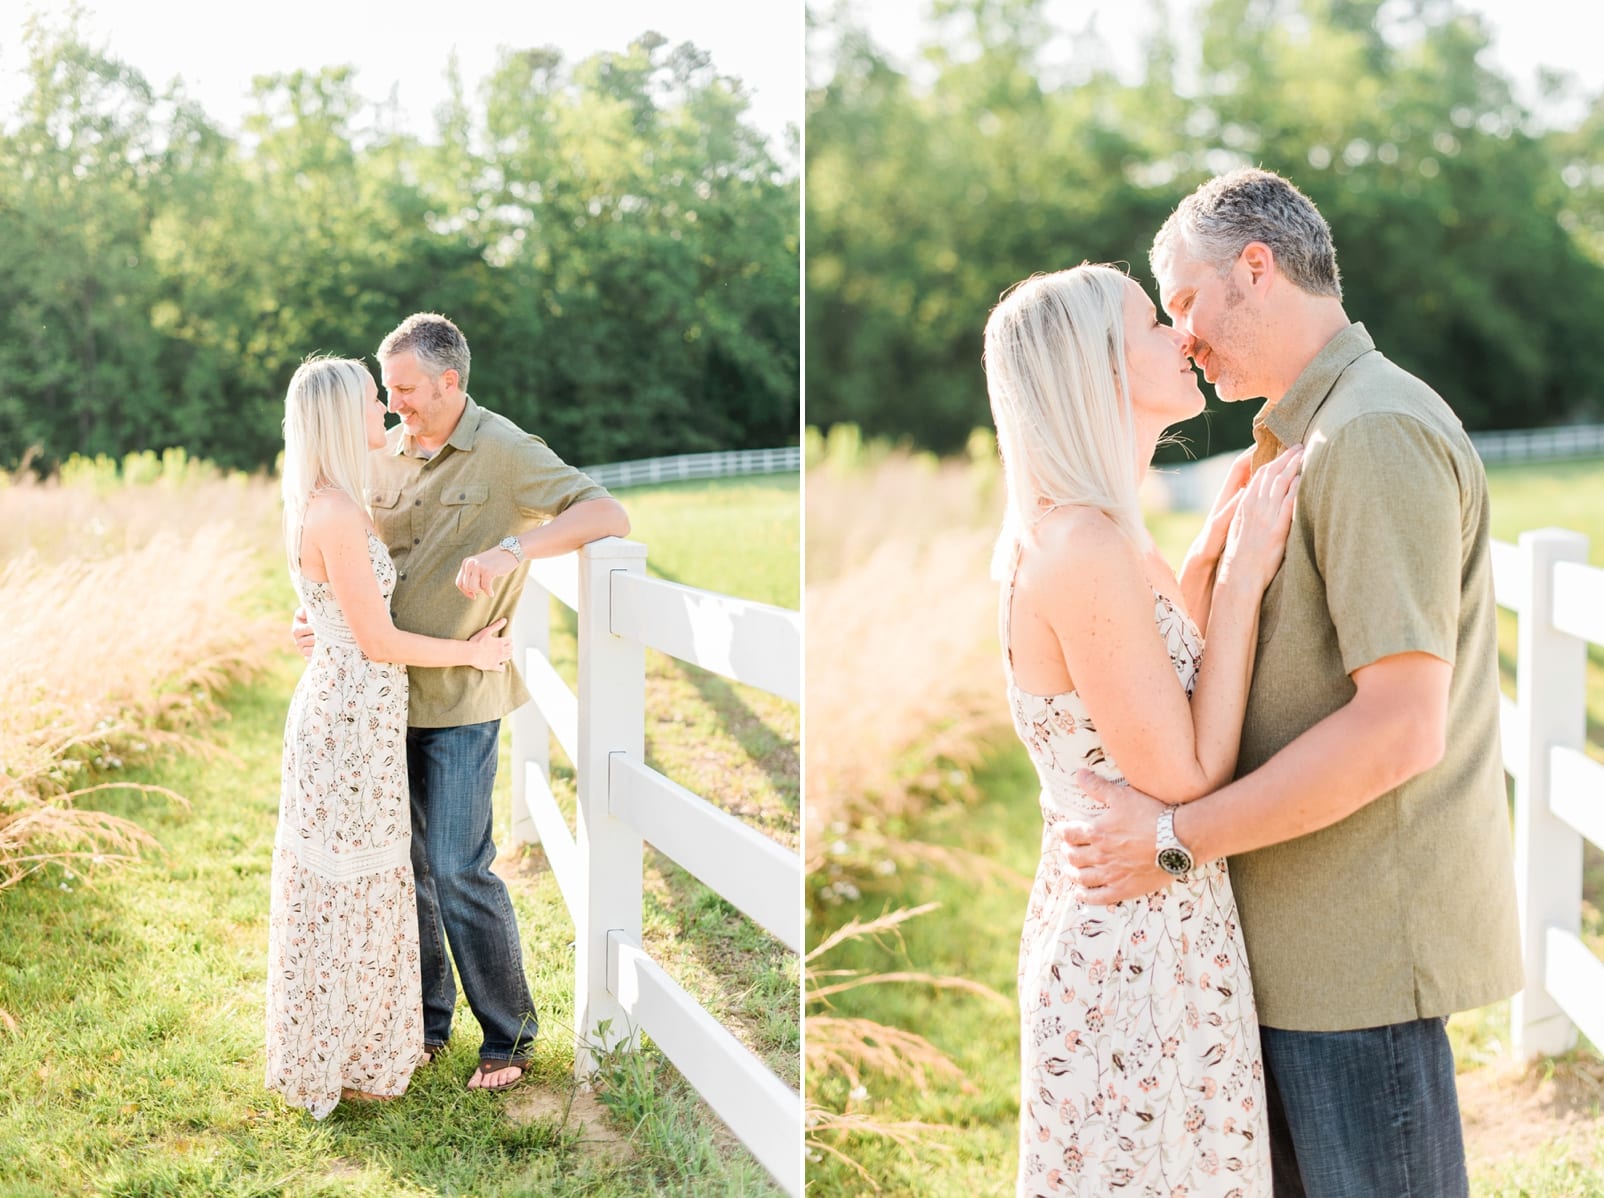 Raleigh engagement session next to a white horse fence photo